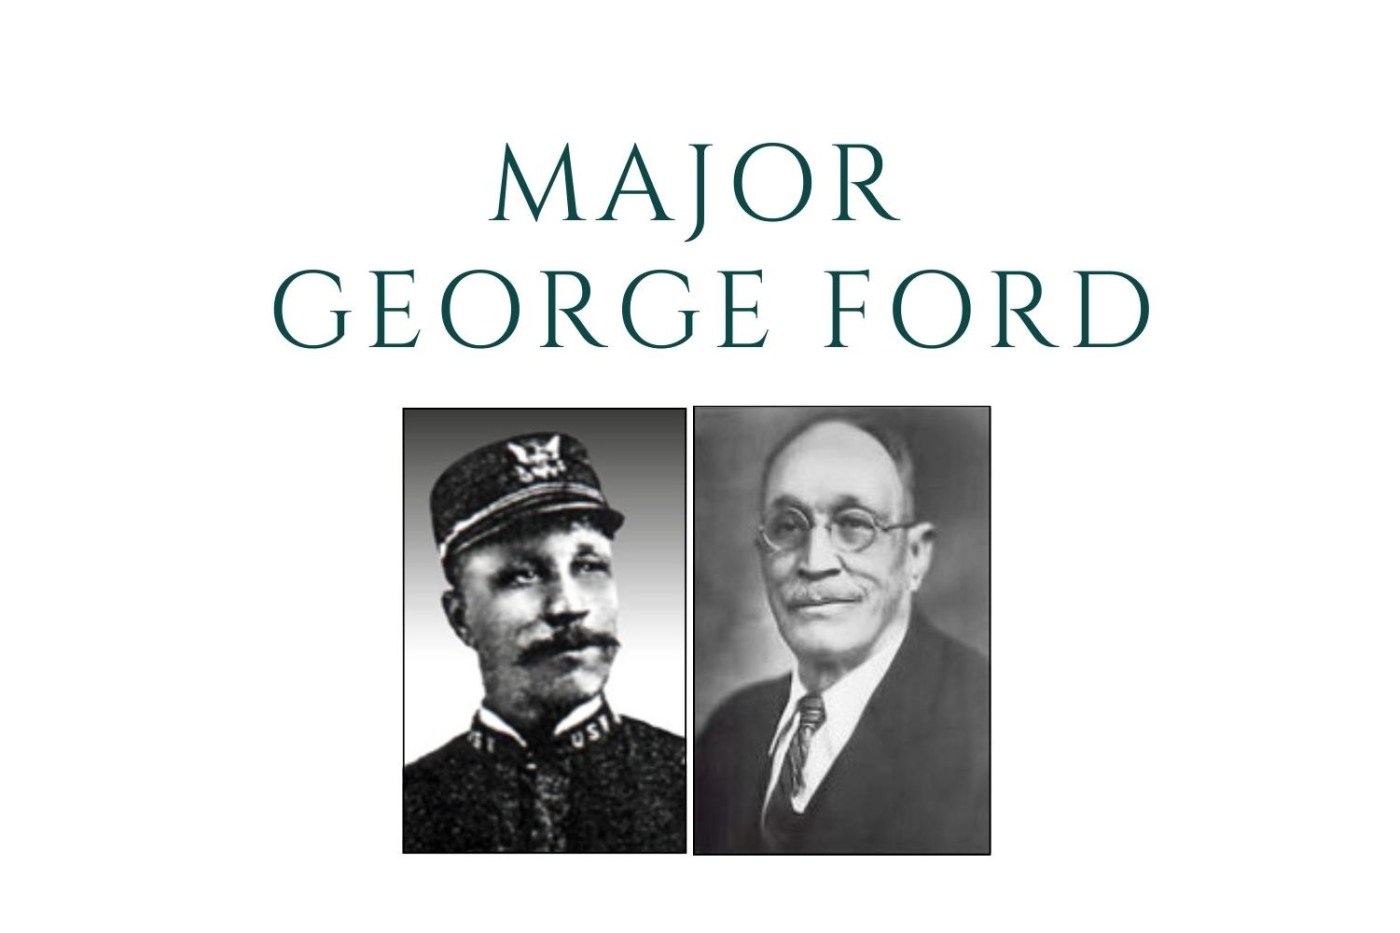 Major George Ford while in the military on the left, and later in life. (NCA)